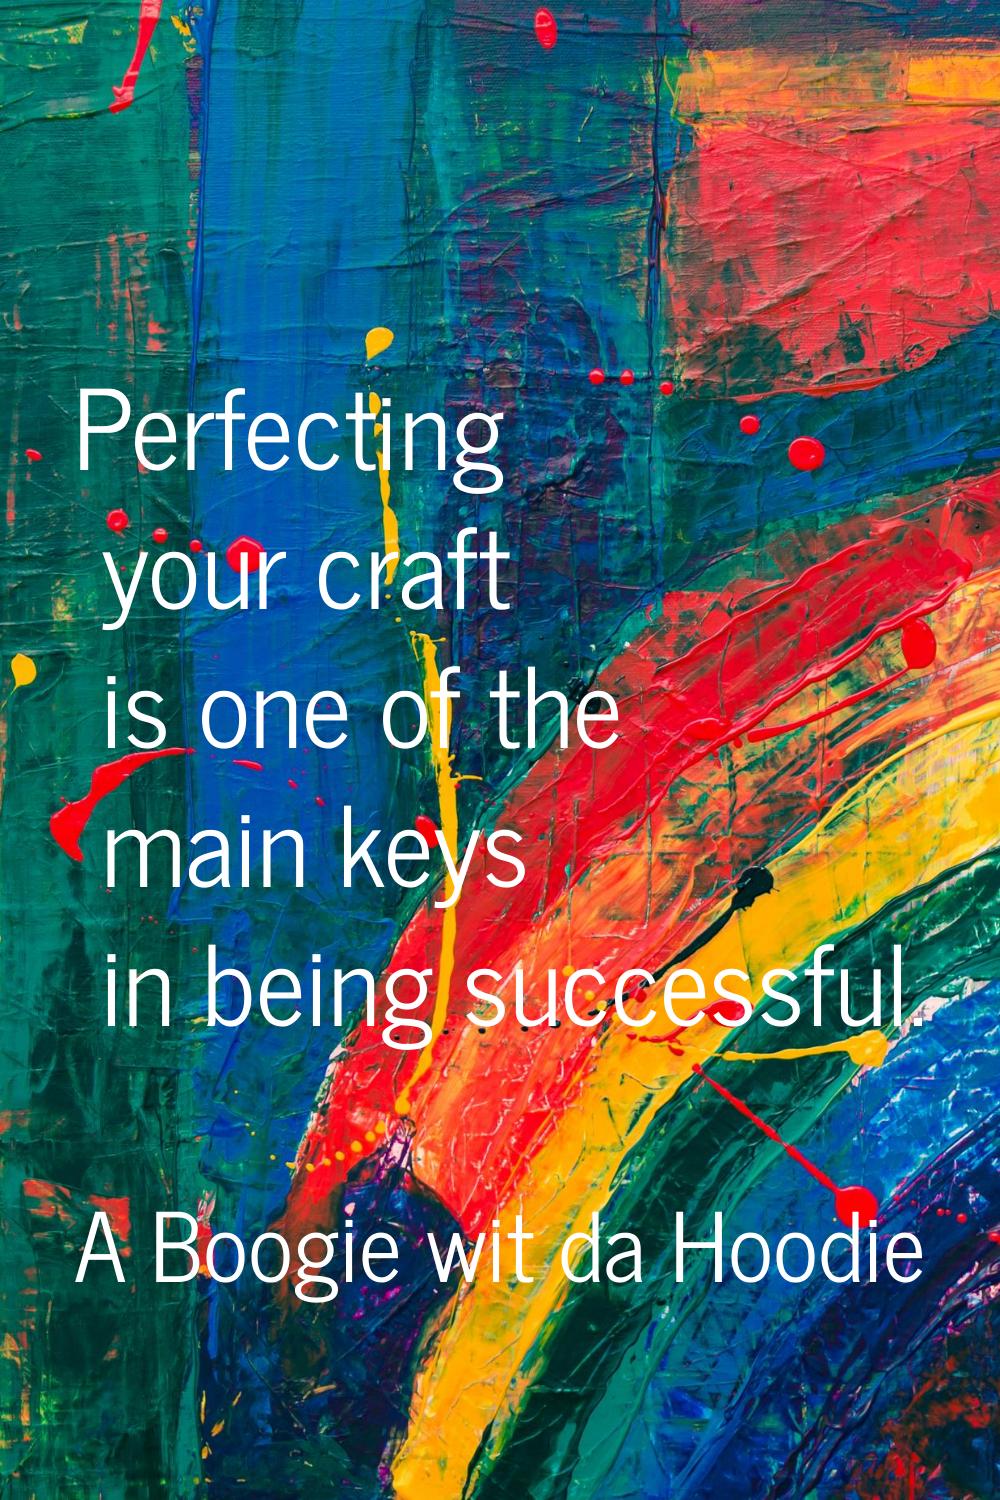 Perfecting your craft is one of the main keys in being successful.